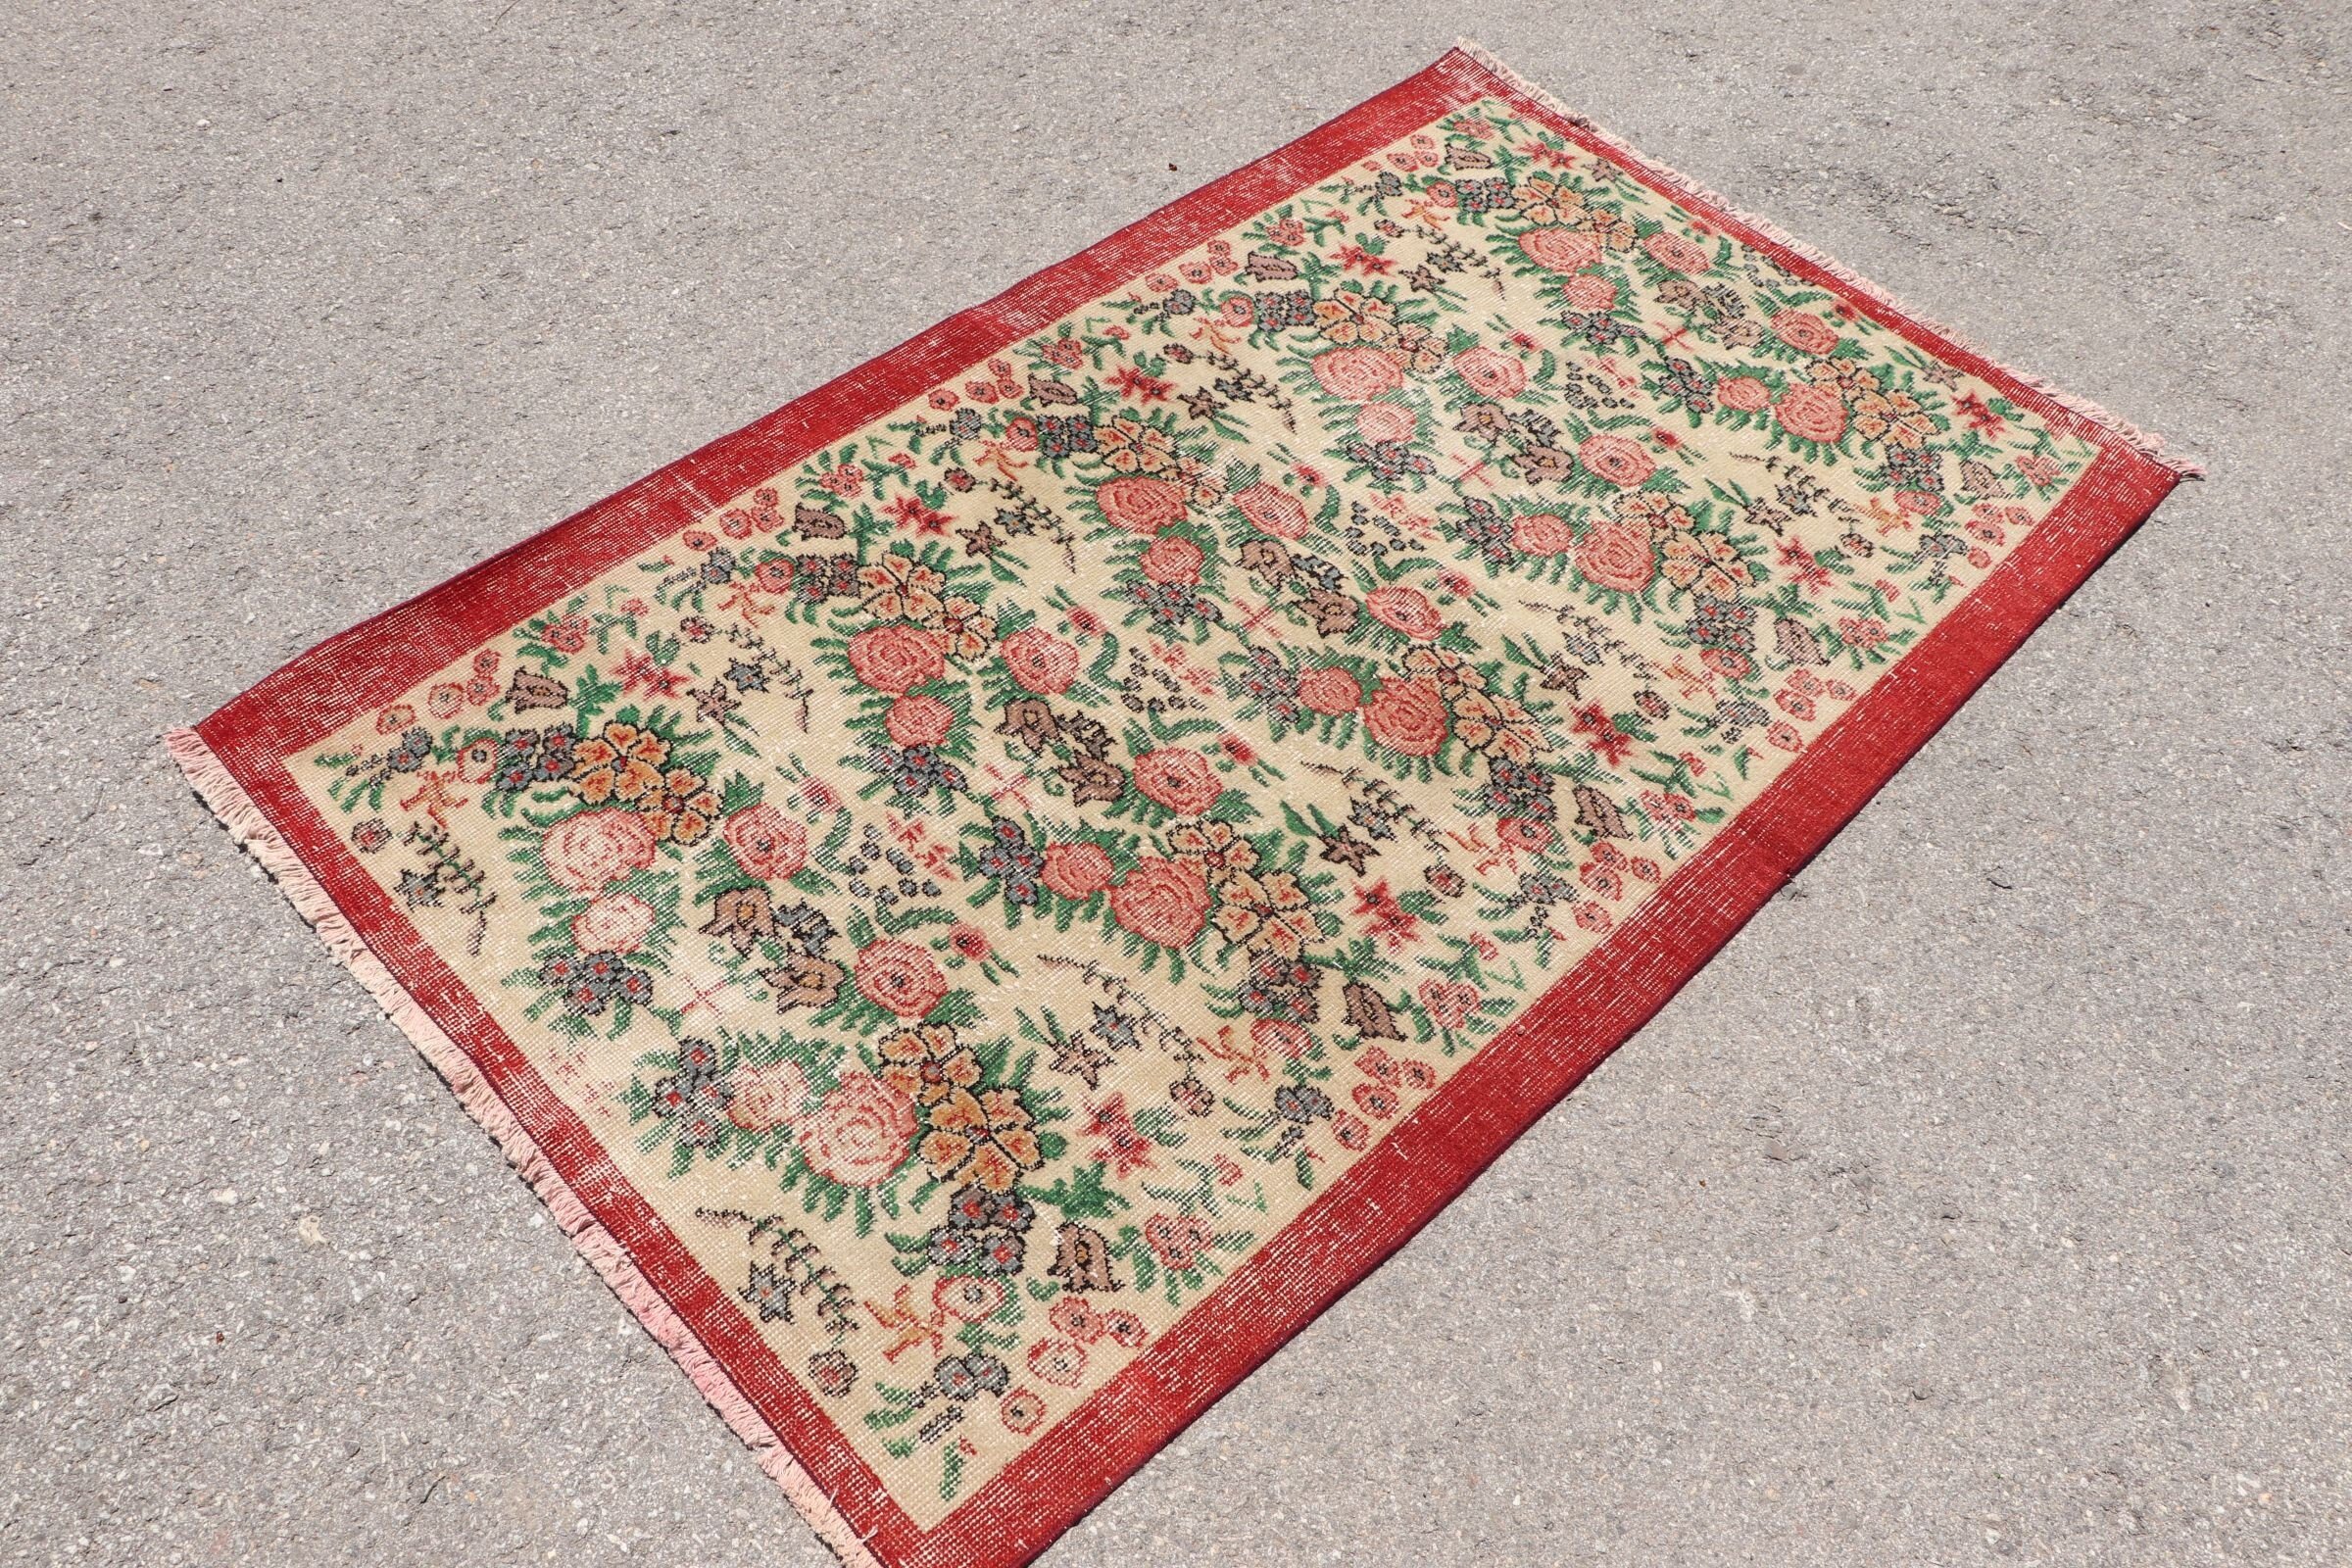 Antique Rug, Kitchen Rugs, Cool Rug, Vintage Rug, 3.6x5.9 ft Accent Rug, Red Home Decor Rugs, Turkish Rugs, Entry Rugs, Rugs for Kitchen